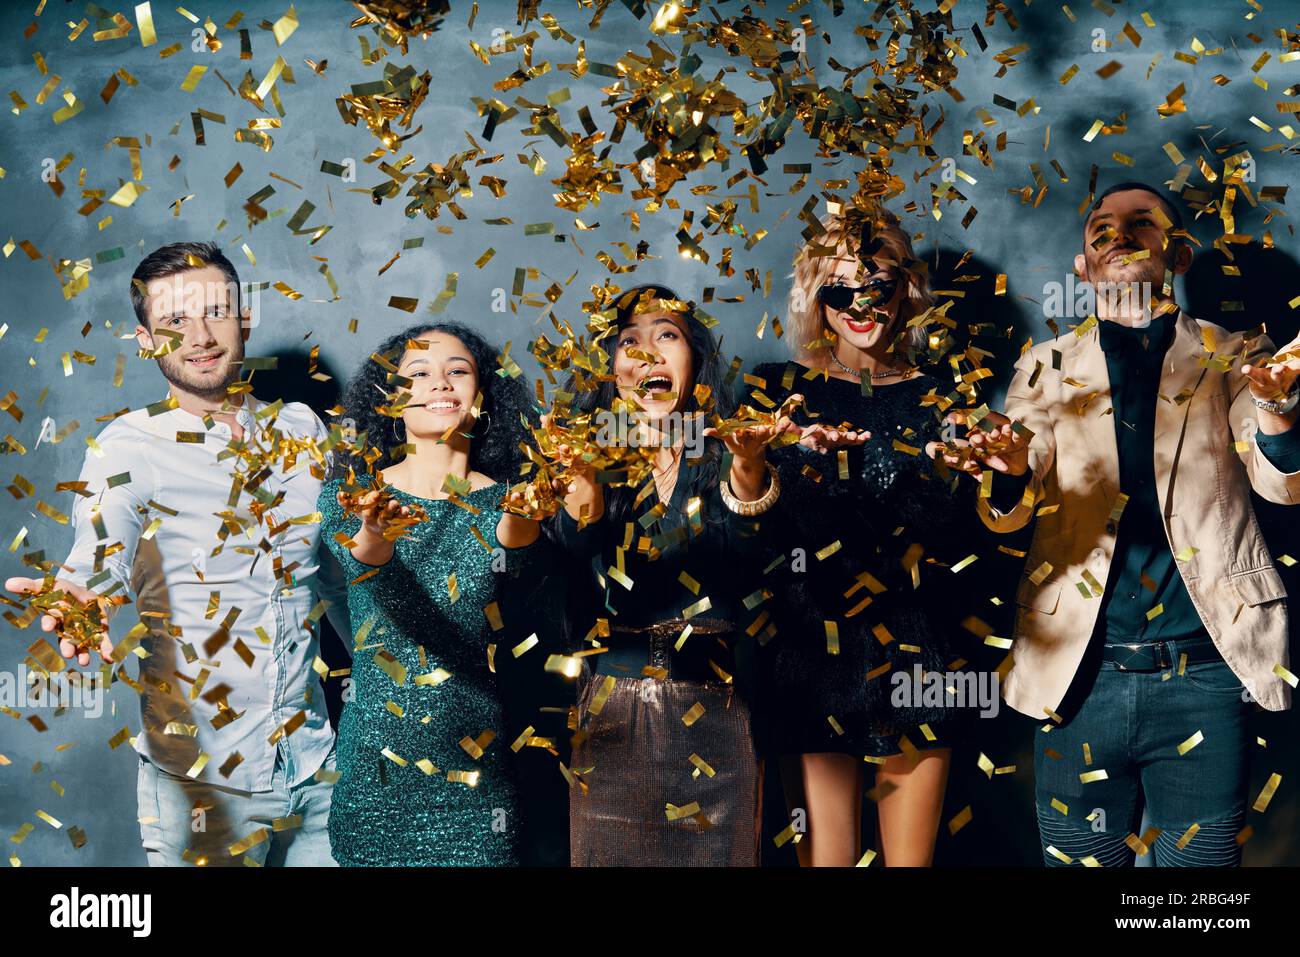 Group of friends enjoying party, dancing and throwing confetti. Celebration concept Stock Photo